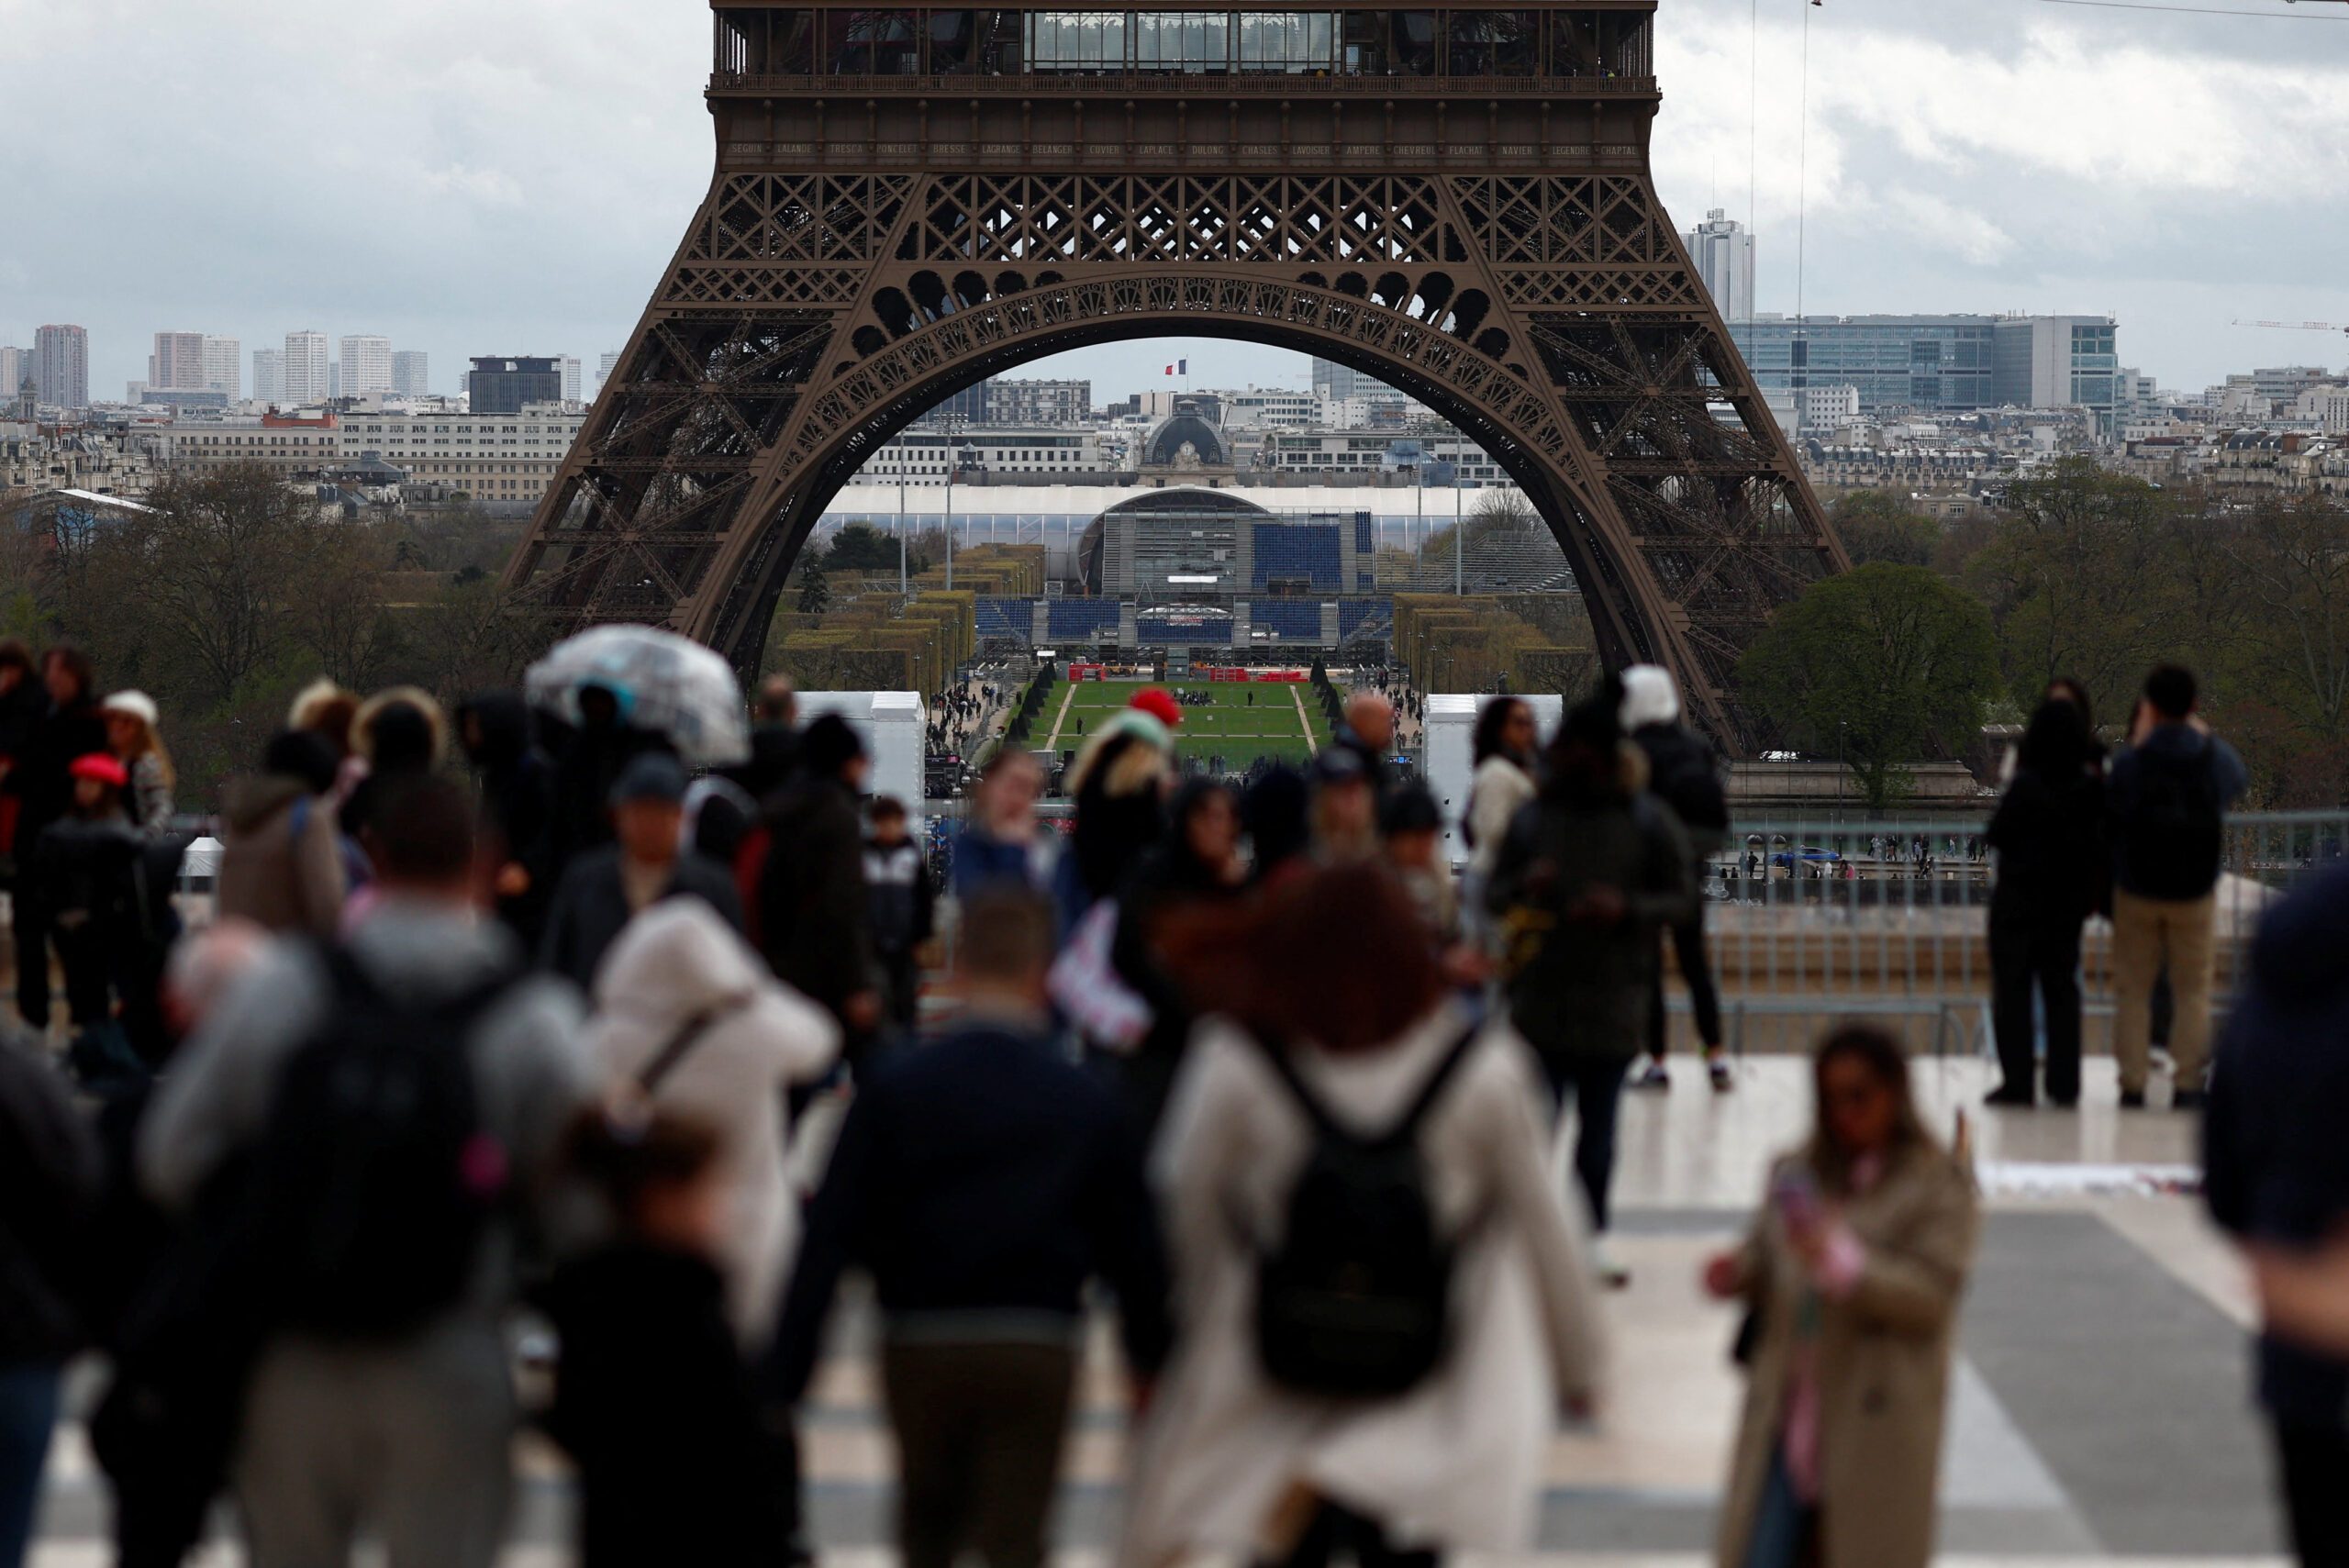 With 100 days to go, Parisians grumble about the Olympic Games